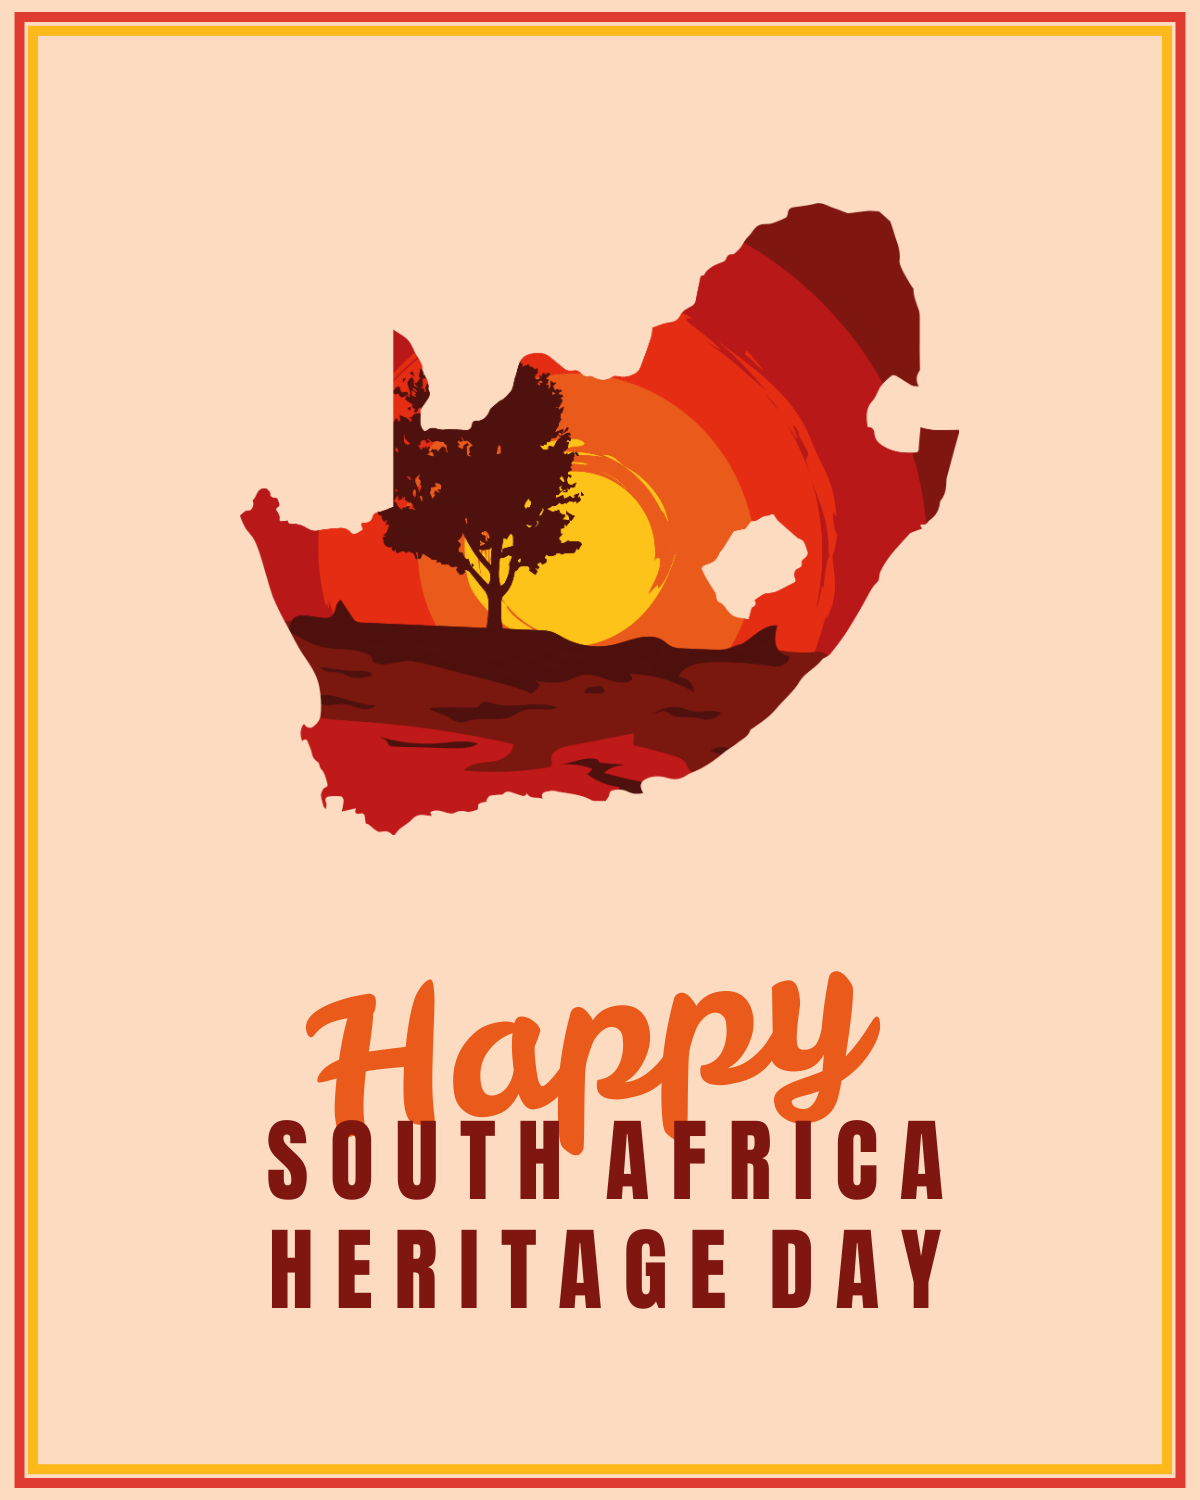 South Africa Heritage Day Facebook Post Template